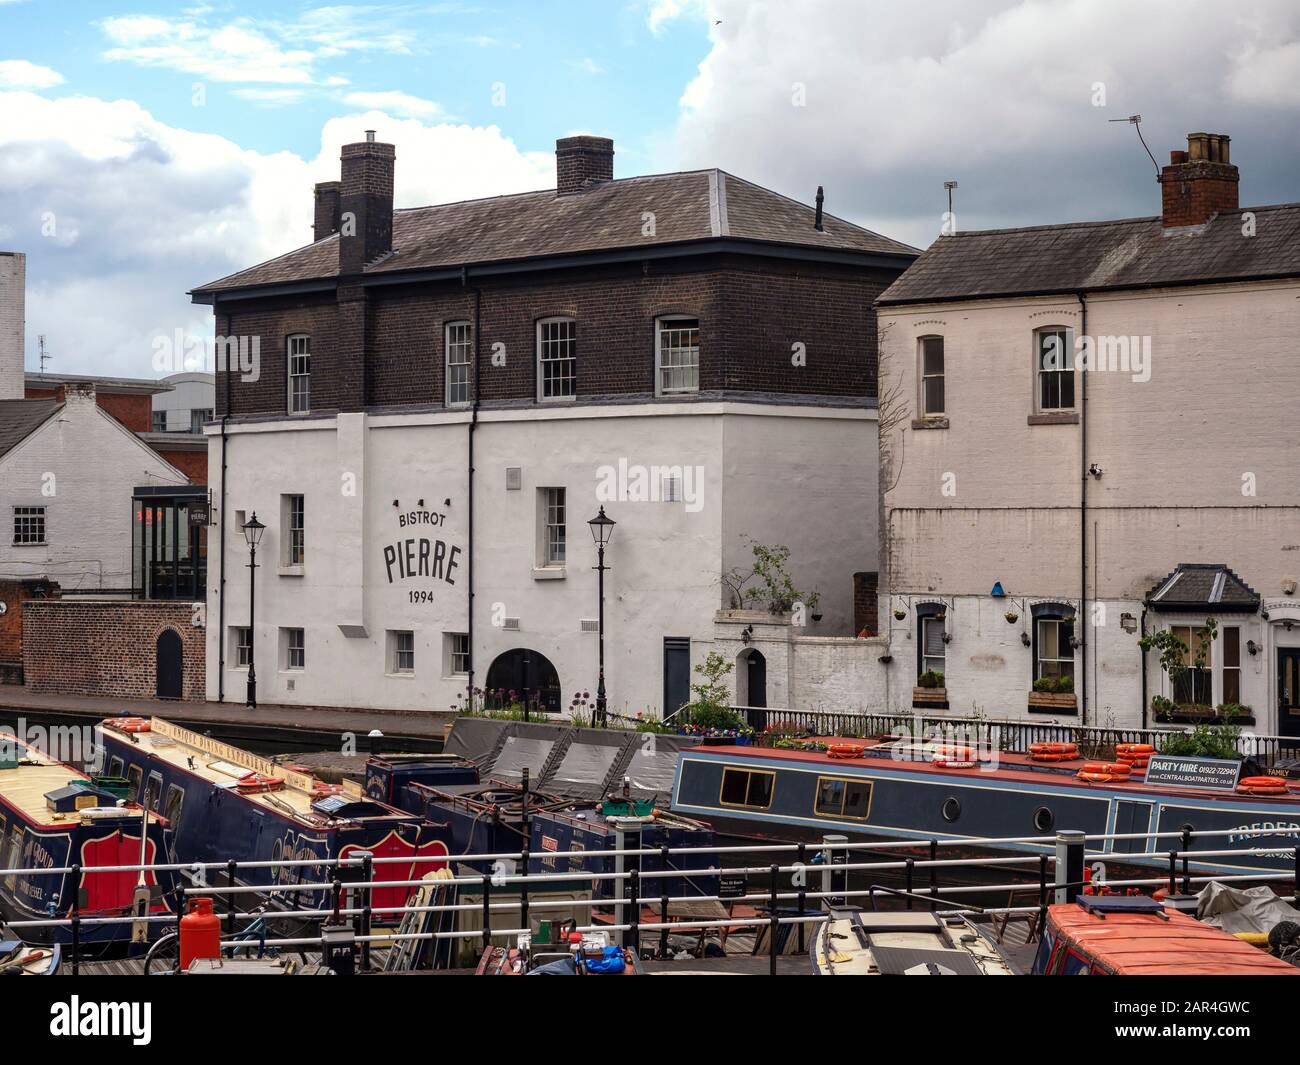 BIRMINGHAM, UK - MAY 28, 2019:  View of Bistrot Pierre over narrowboats moored on the canal at Brindley Place. Stock Photo